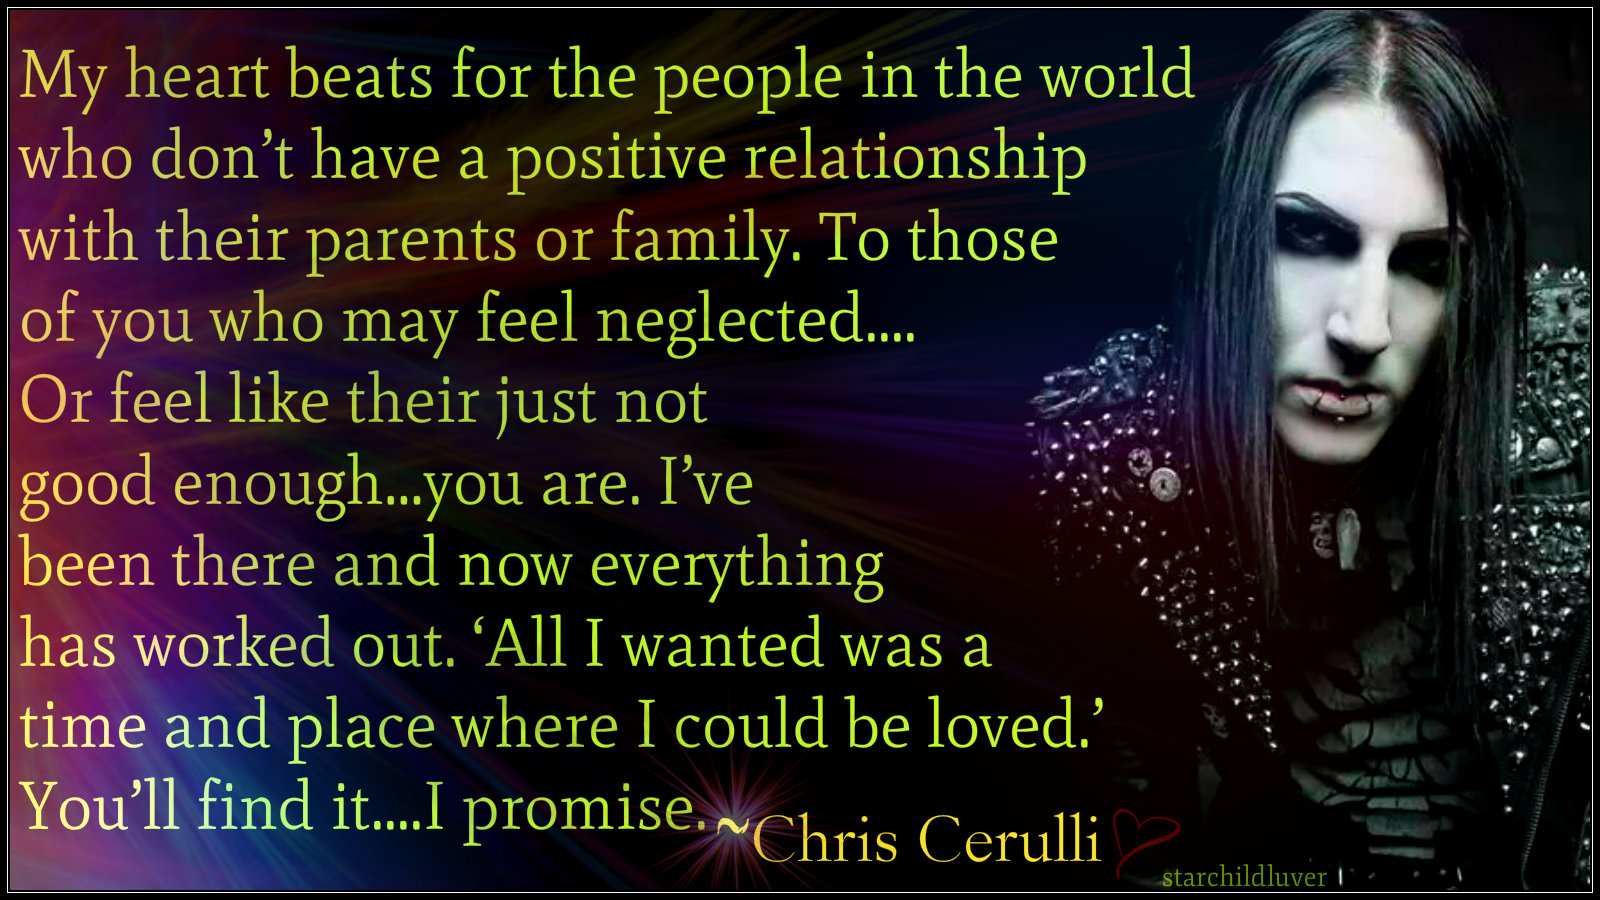 Chris Motionless Cerulli (quote) - Motionless in White Wallpaper (37815830)  - Fanpop